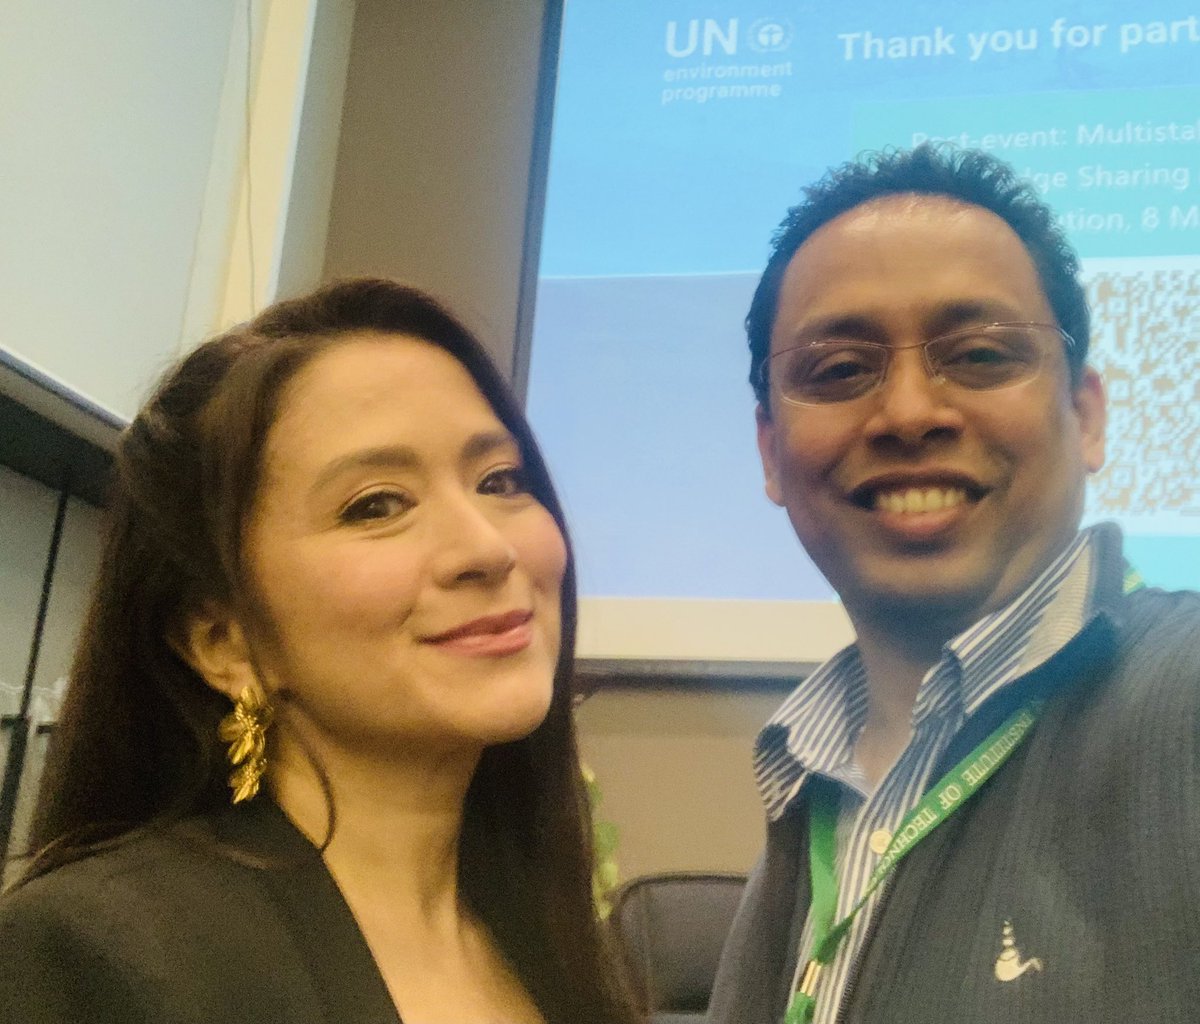 For the people and the planet! Great meeting with lovely @AntoinetteTaus one of the most influential role models in our field. #INC4 #asia #pacific #ASEAN #thailand #PlasticPollution #UNEP